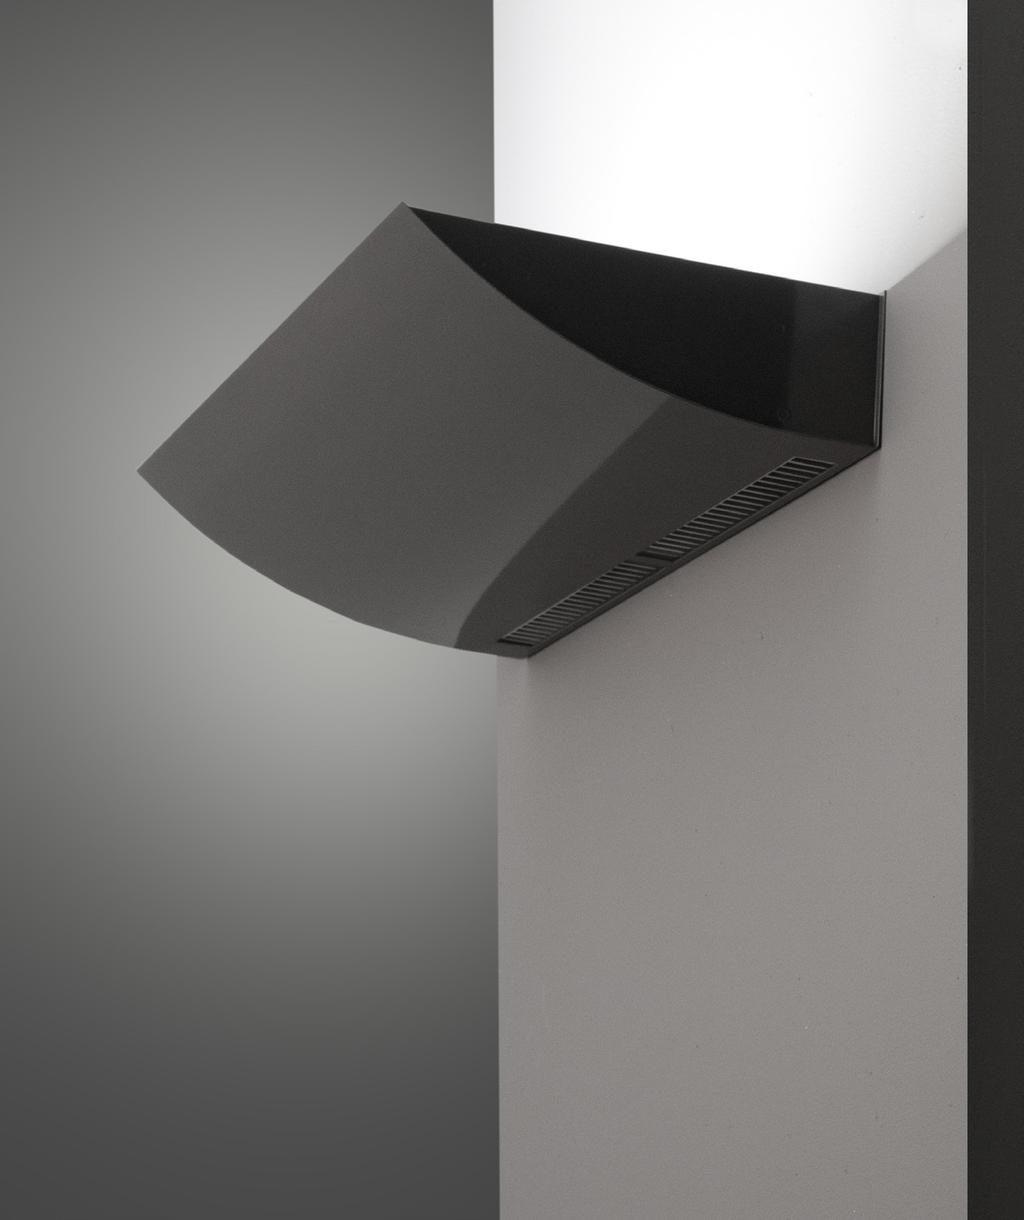 DecoLED TM INTERIOR ASYMMETRIC INDIRECT ING Asymmetric indirect lighting Ideal for accenting sloped ceilings, retrofitting existing public spaces and natatorium applications Offered in two shapes